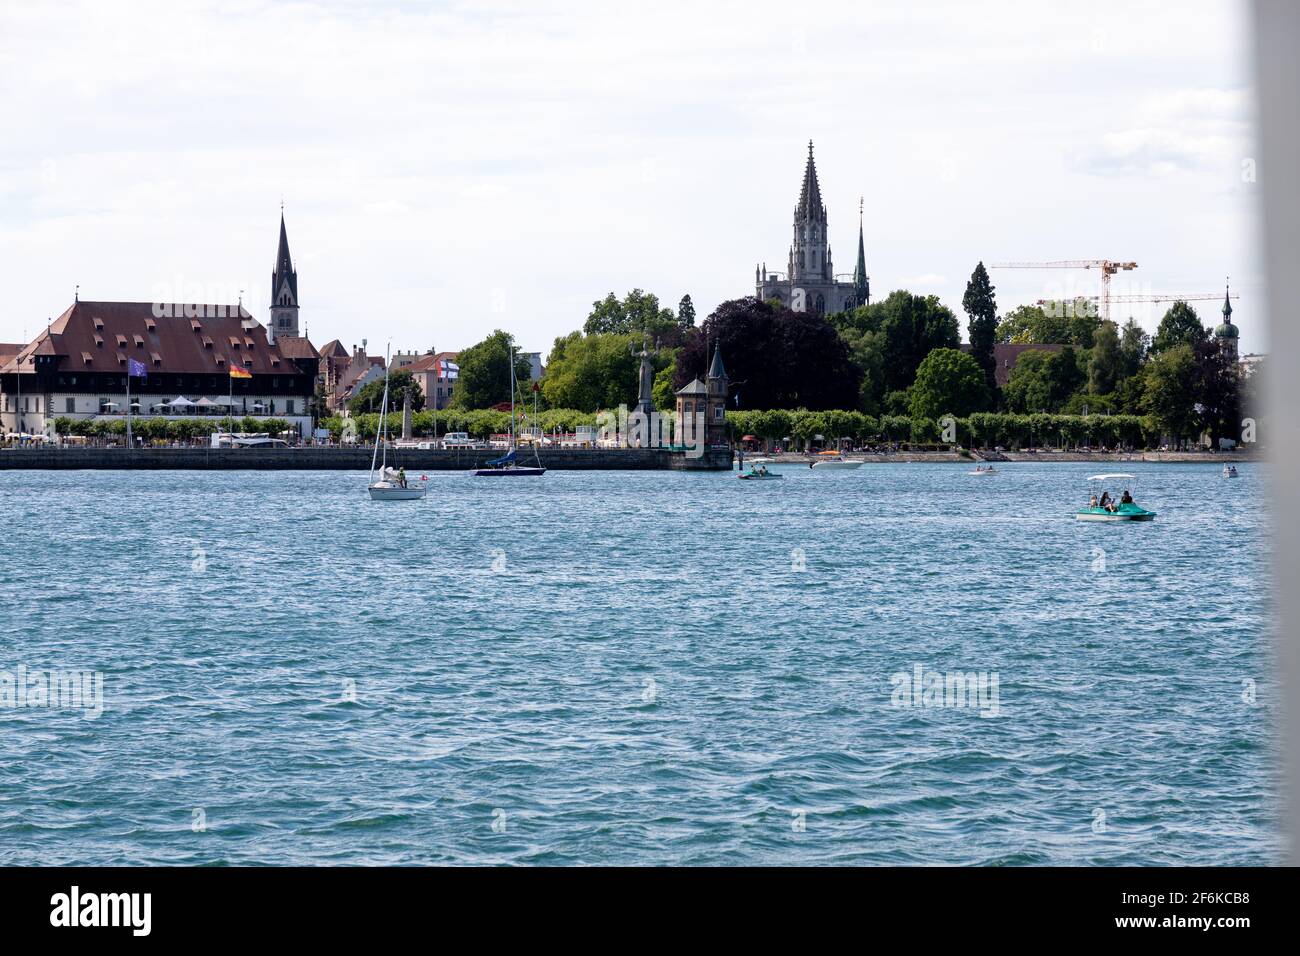 Konstanz, Germany - July 8,2020: View from Constance to the Constance harbor entrance Stock Photo